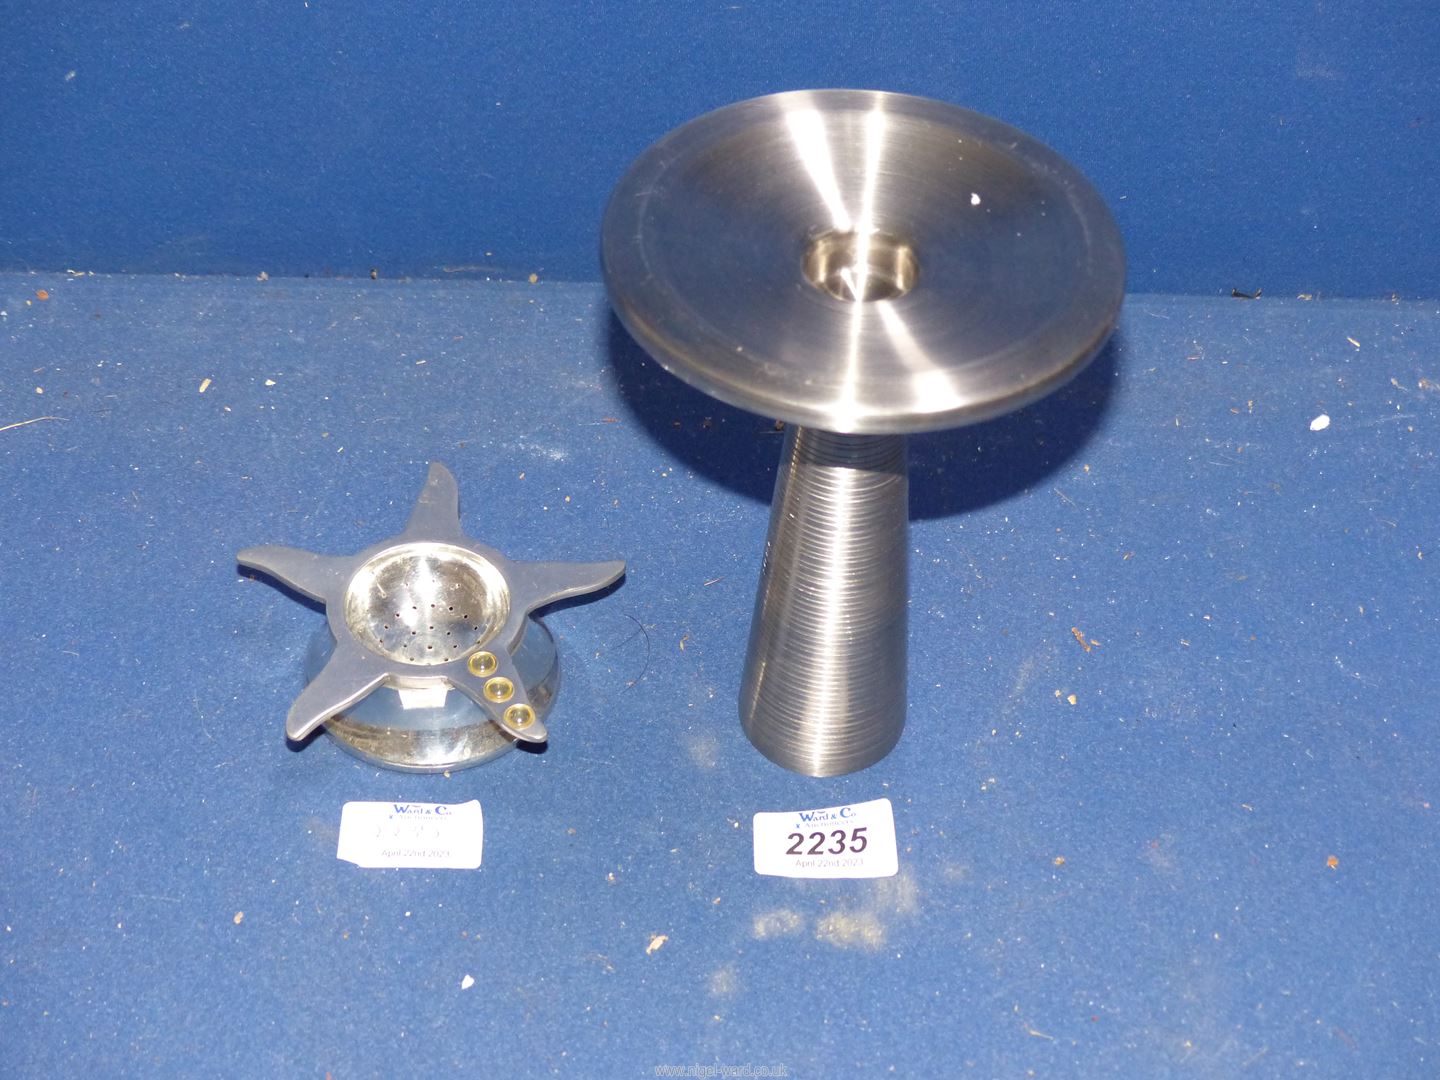 A David Mellor stainless steel candle holder and a Nick Munro pewter tea strainer and drip tray.